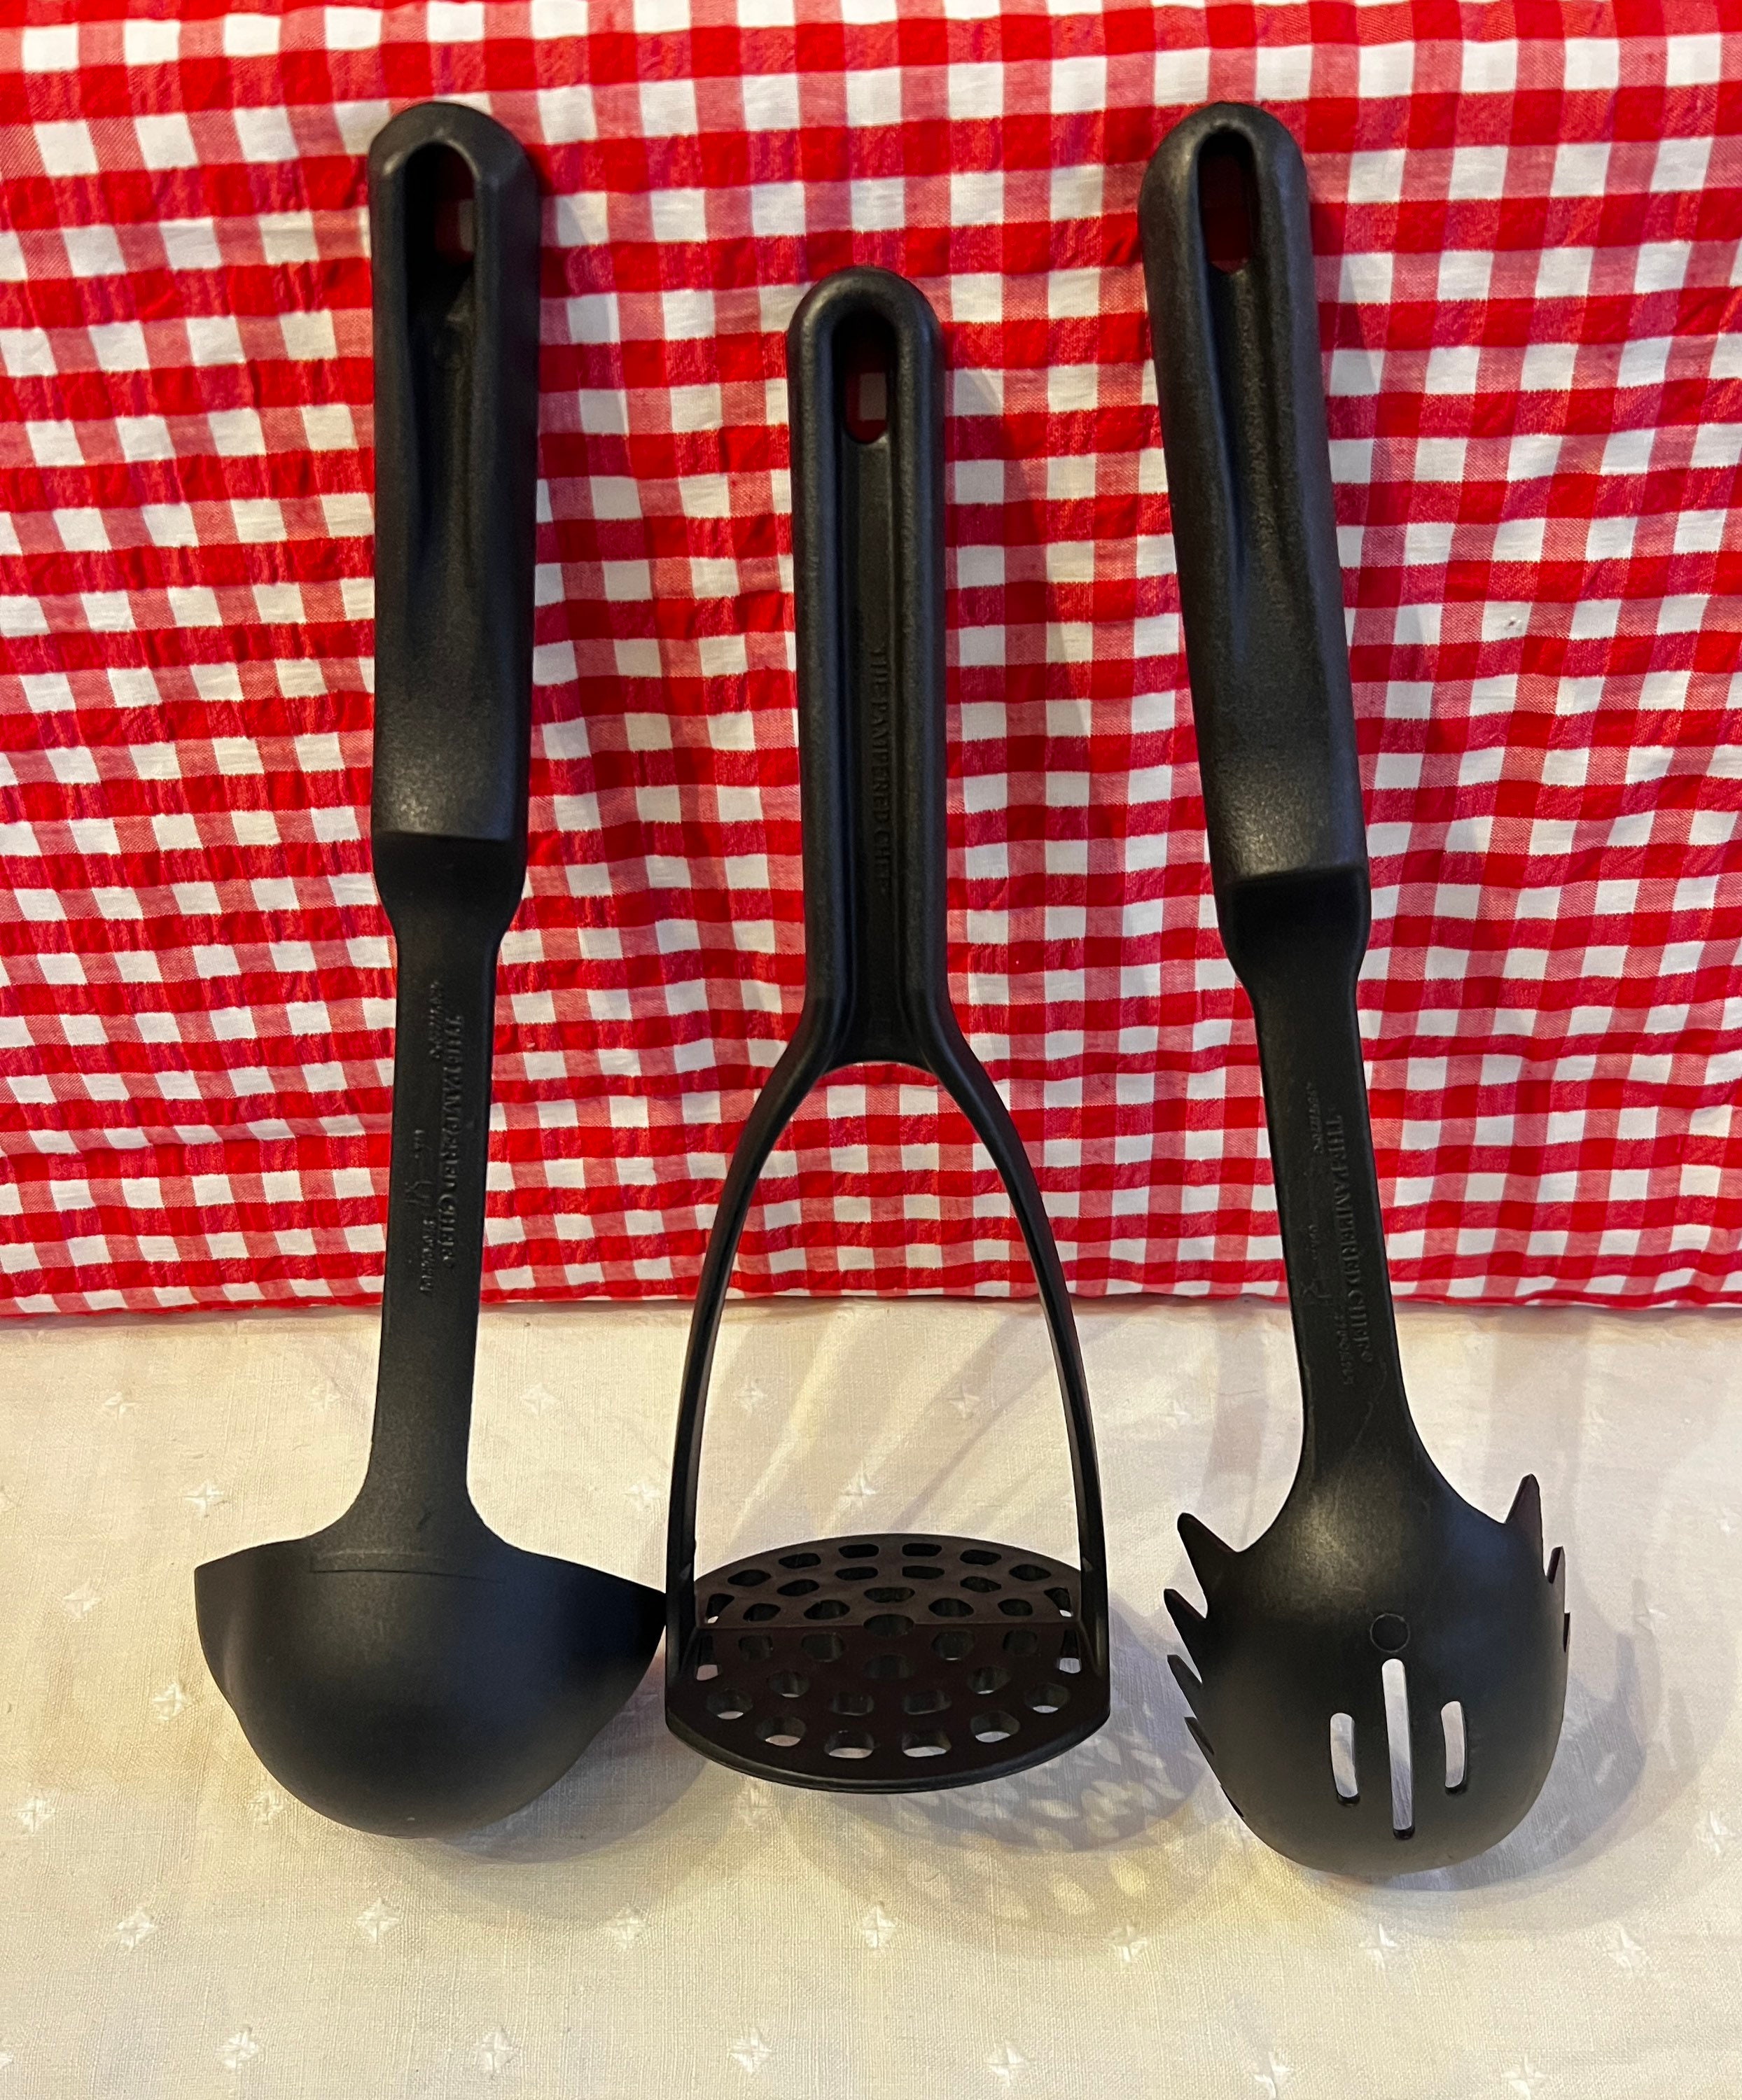 The Pampered Chef Food Chopper, Vintage Kitchen Utensils and Tools